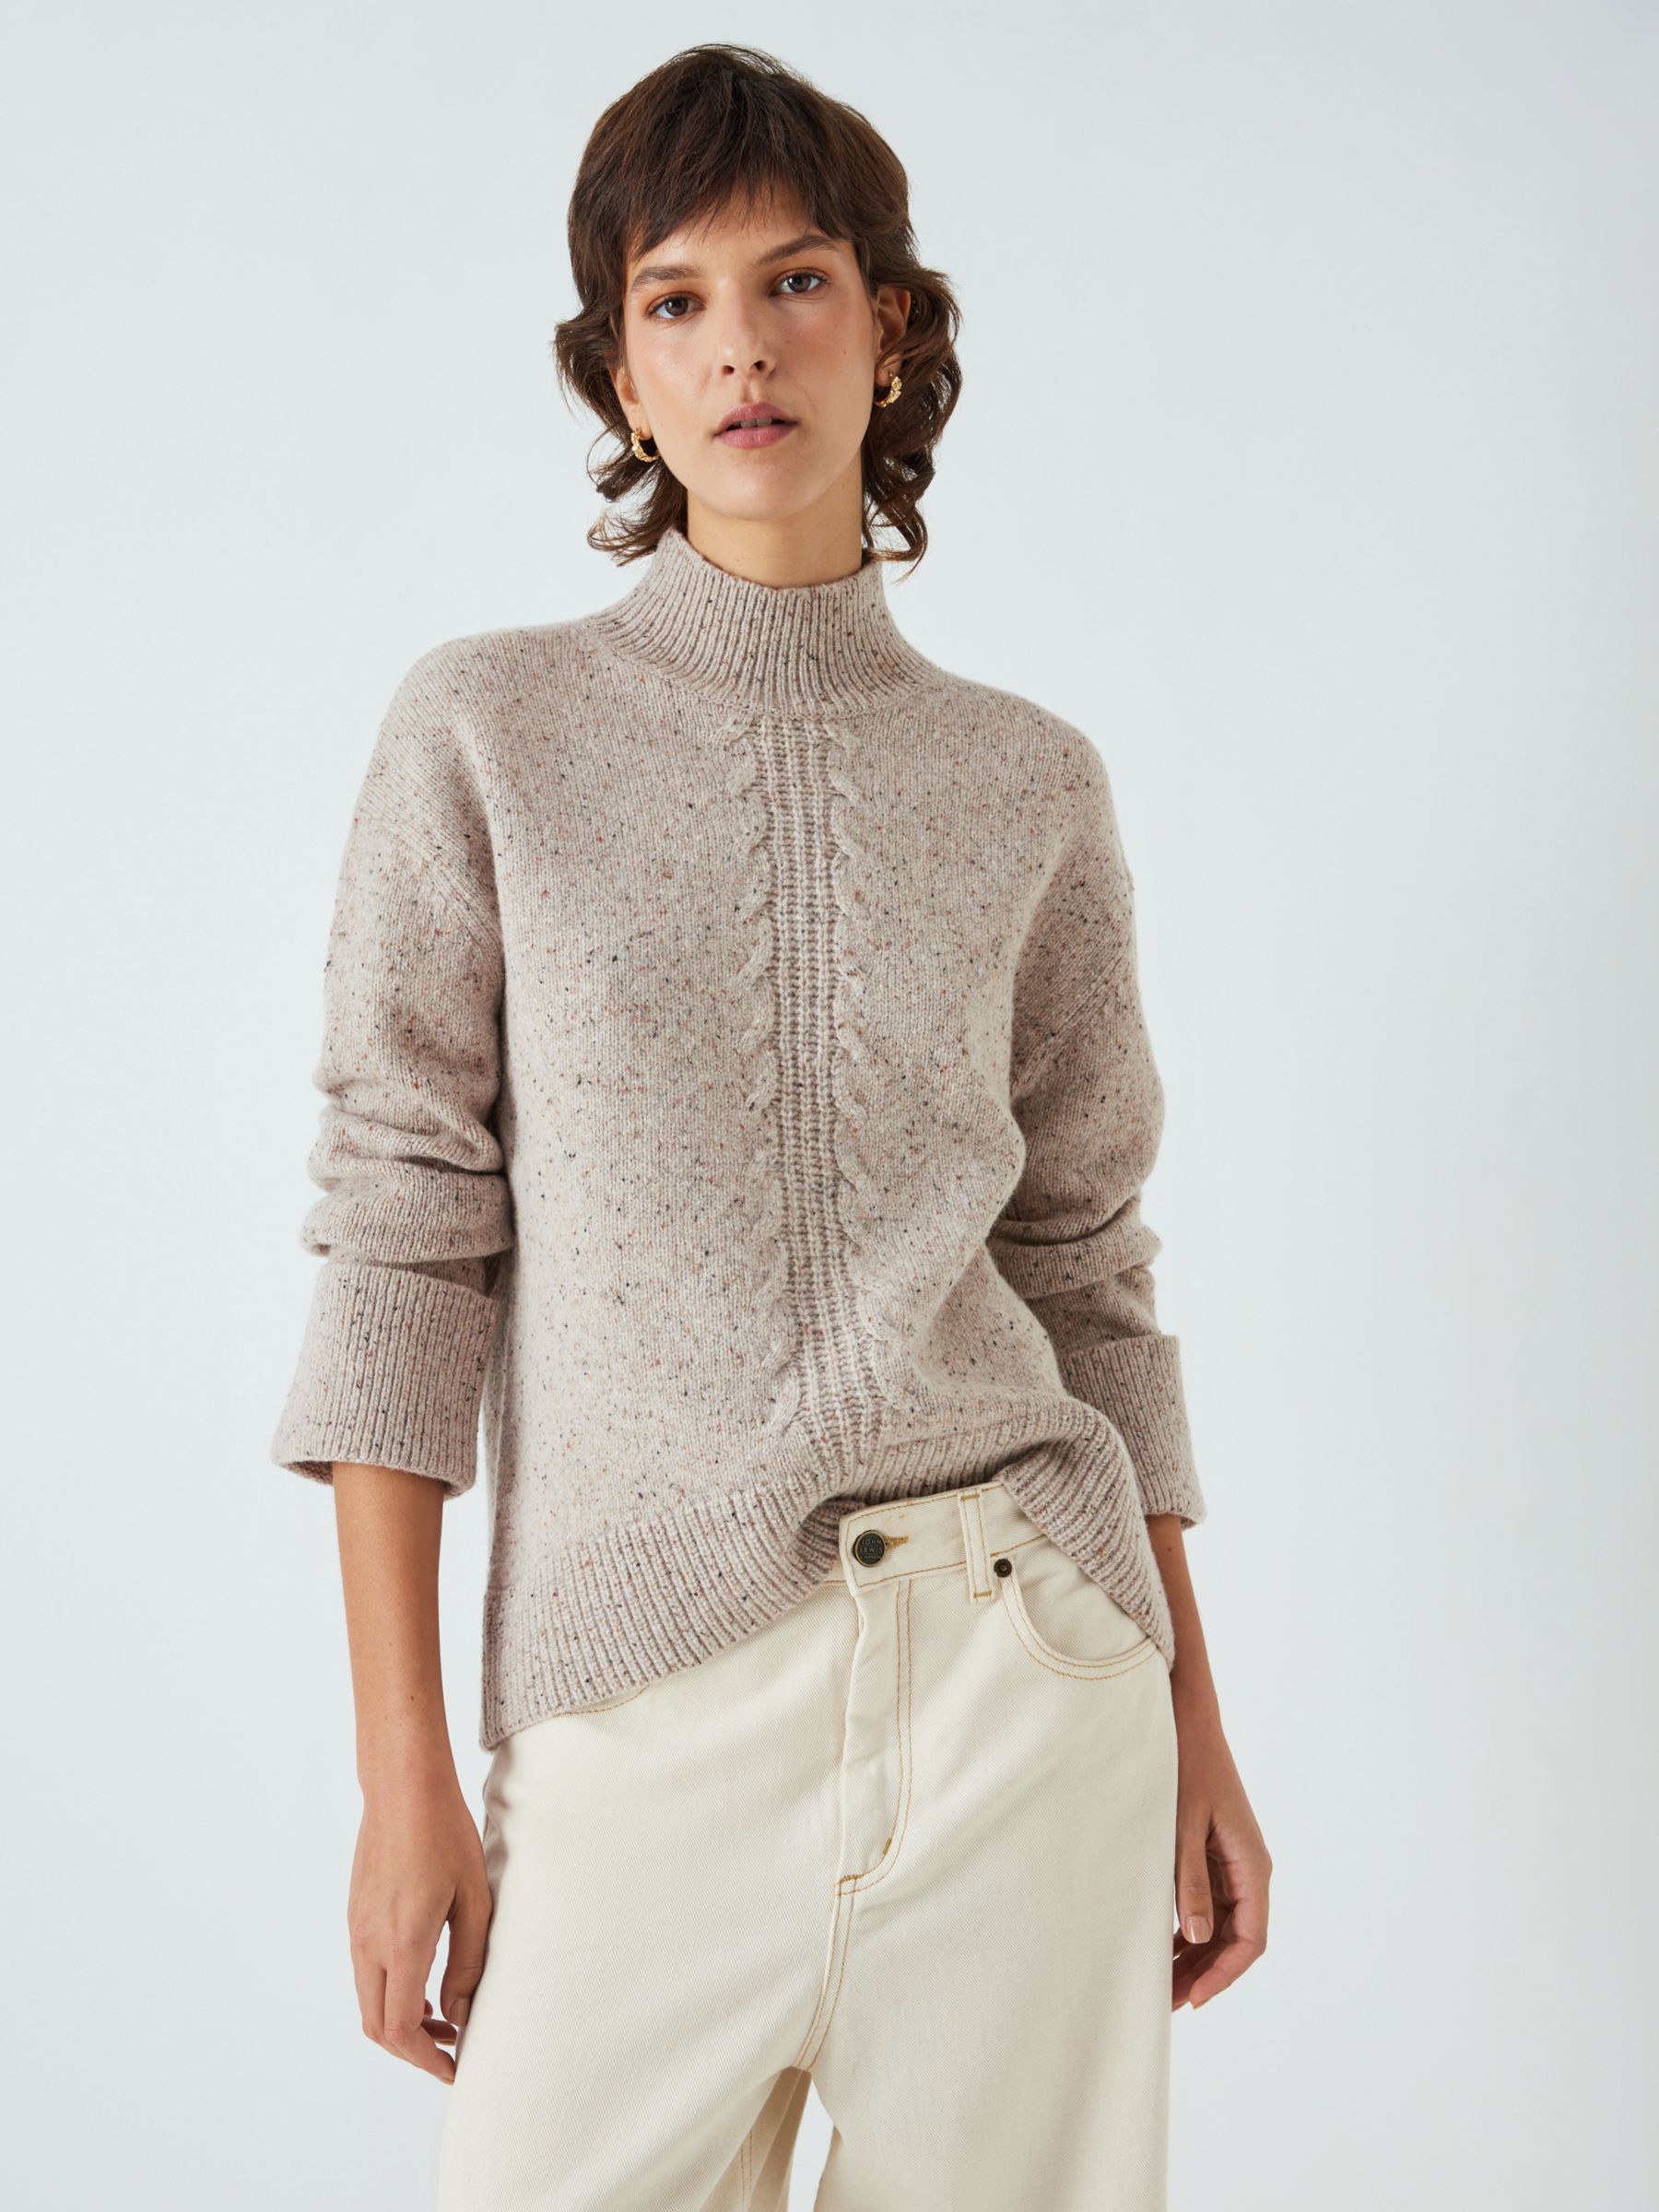 John Lewis Donegal Roll Neck Wool Blend Knit Jumper, Paradiso at John Lewis  & Partners